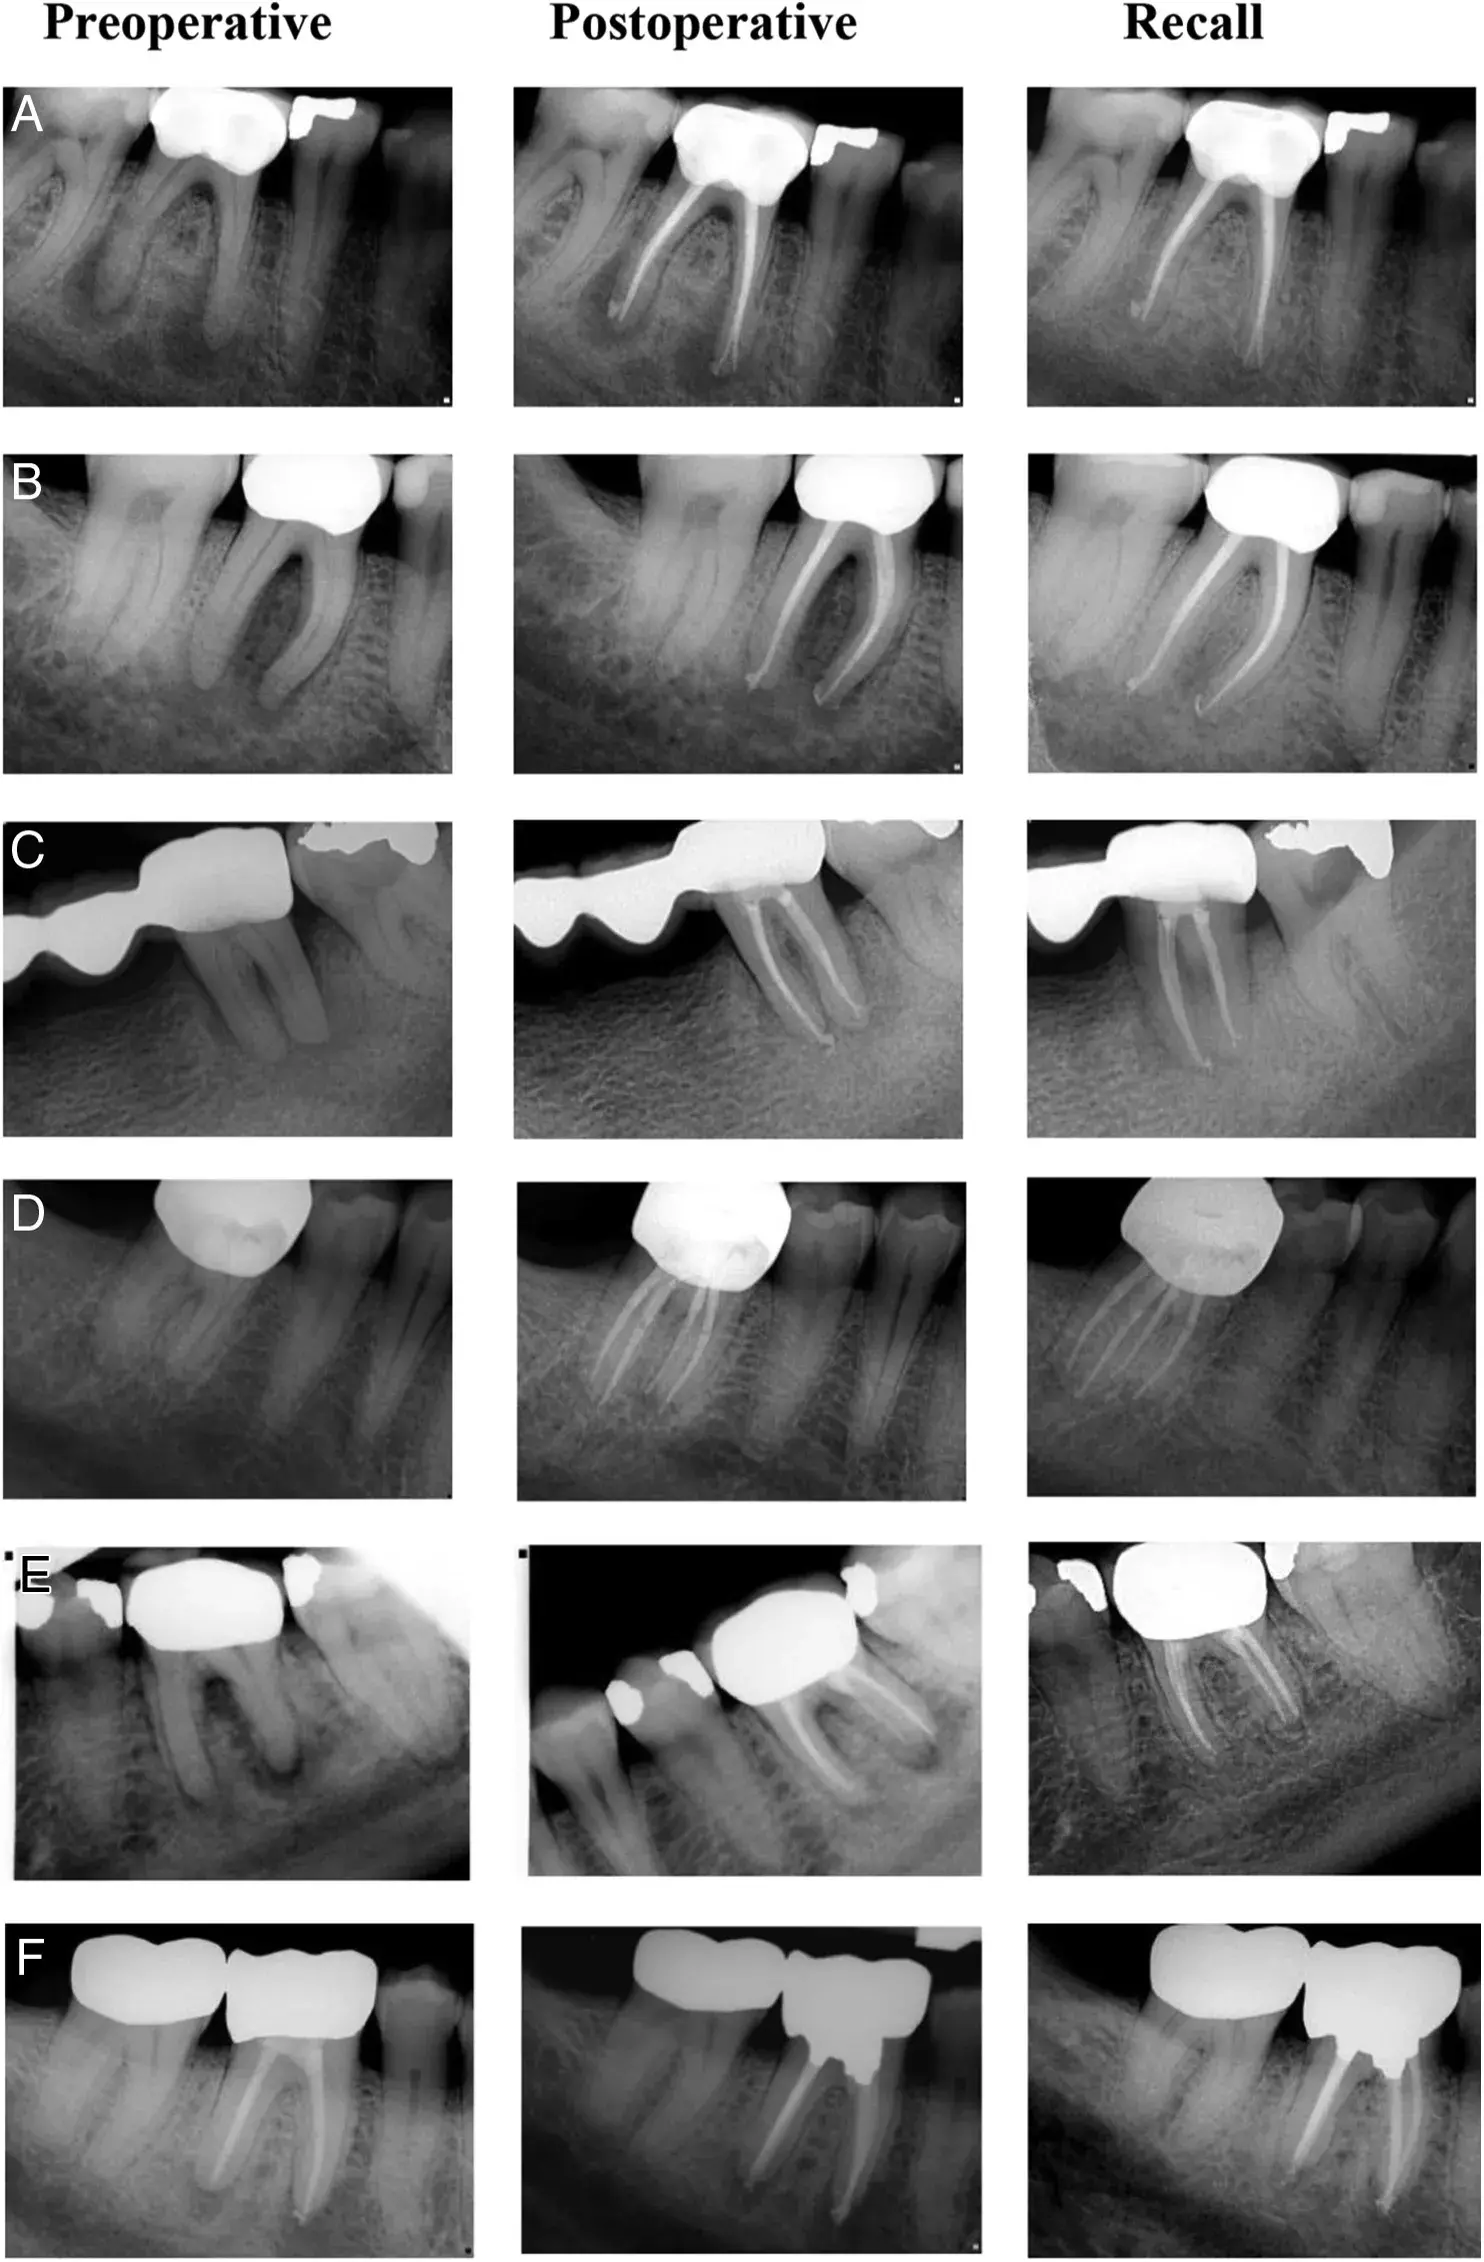 Radiography of periapical lesions